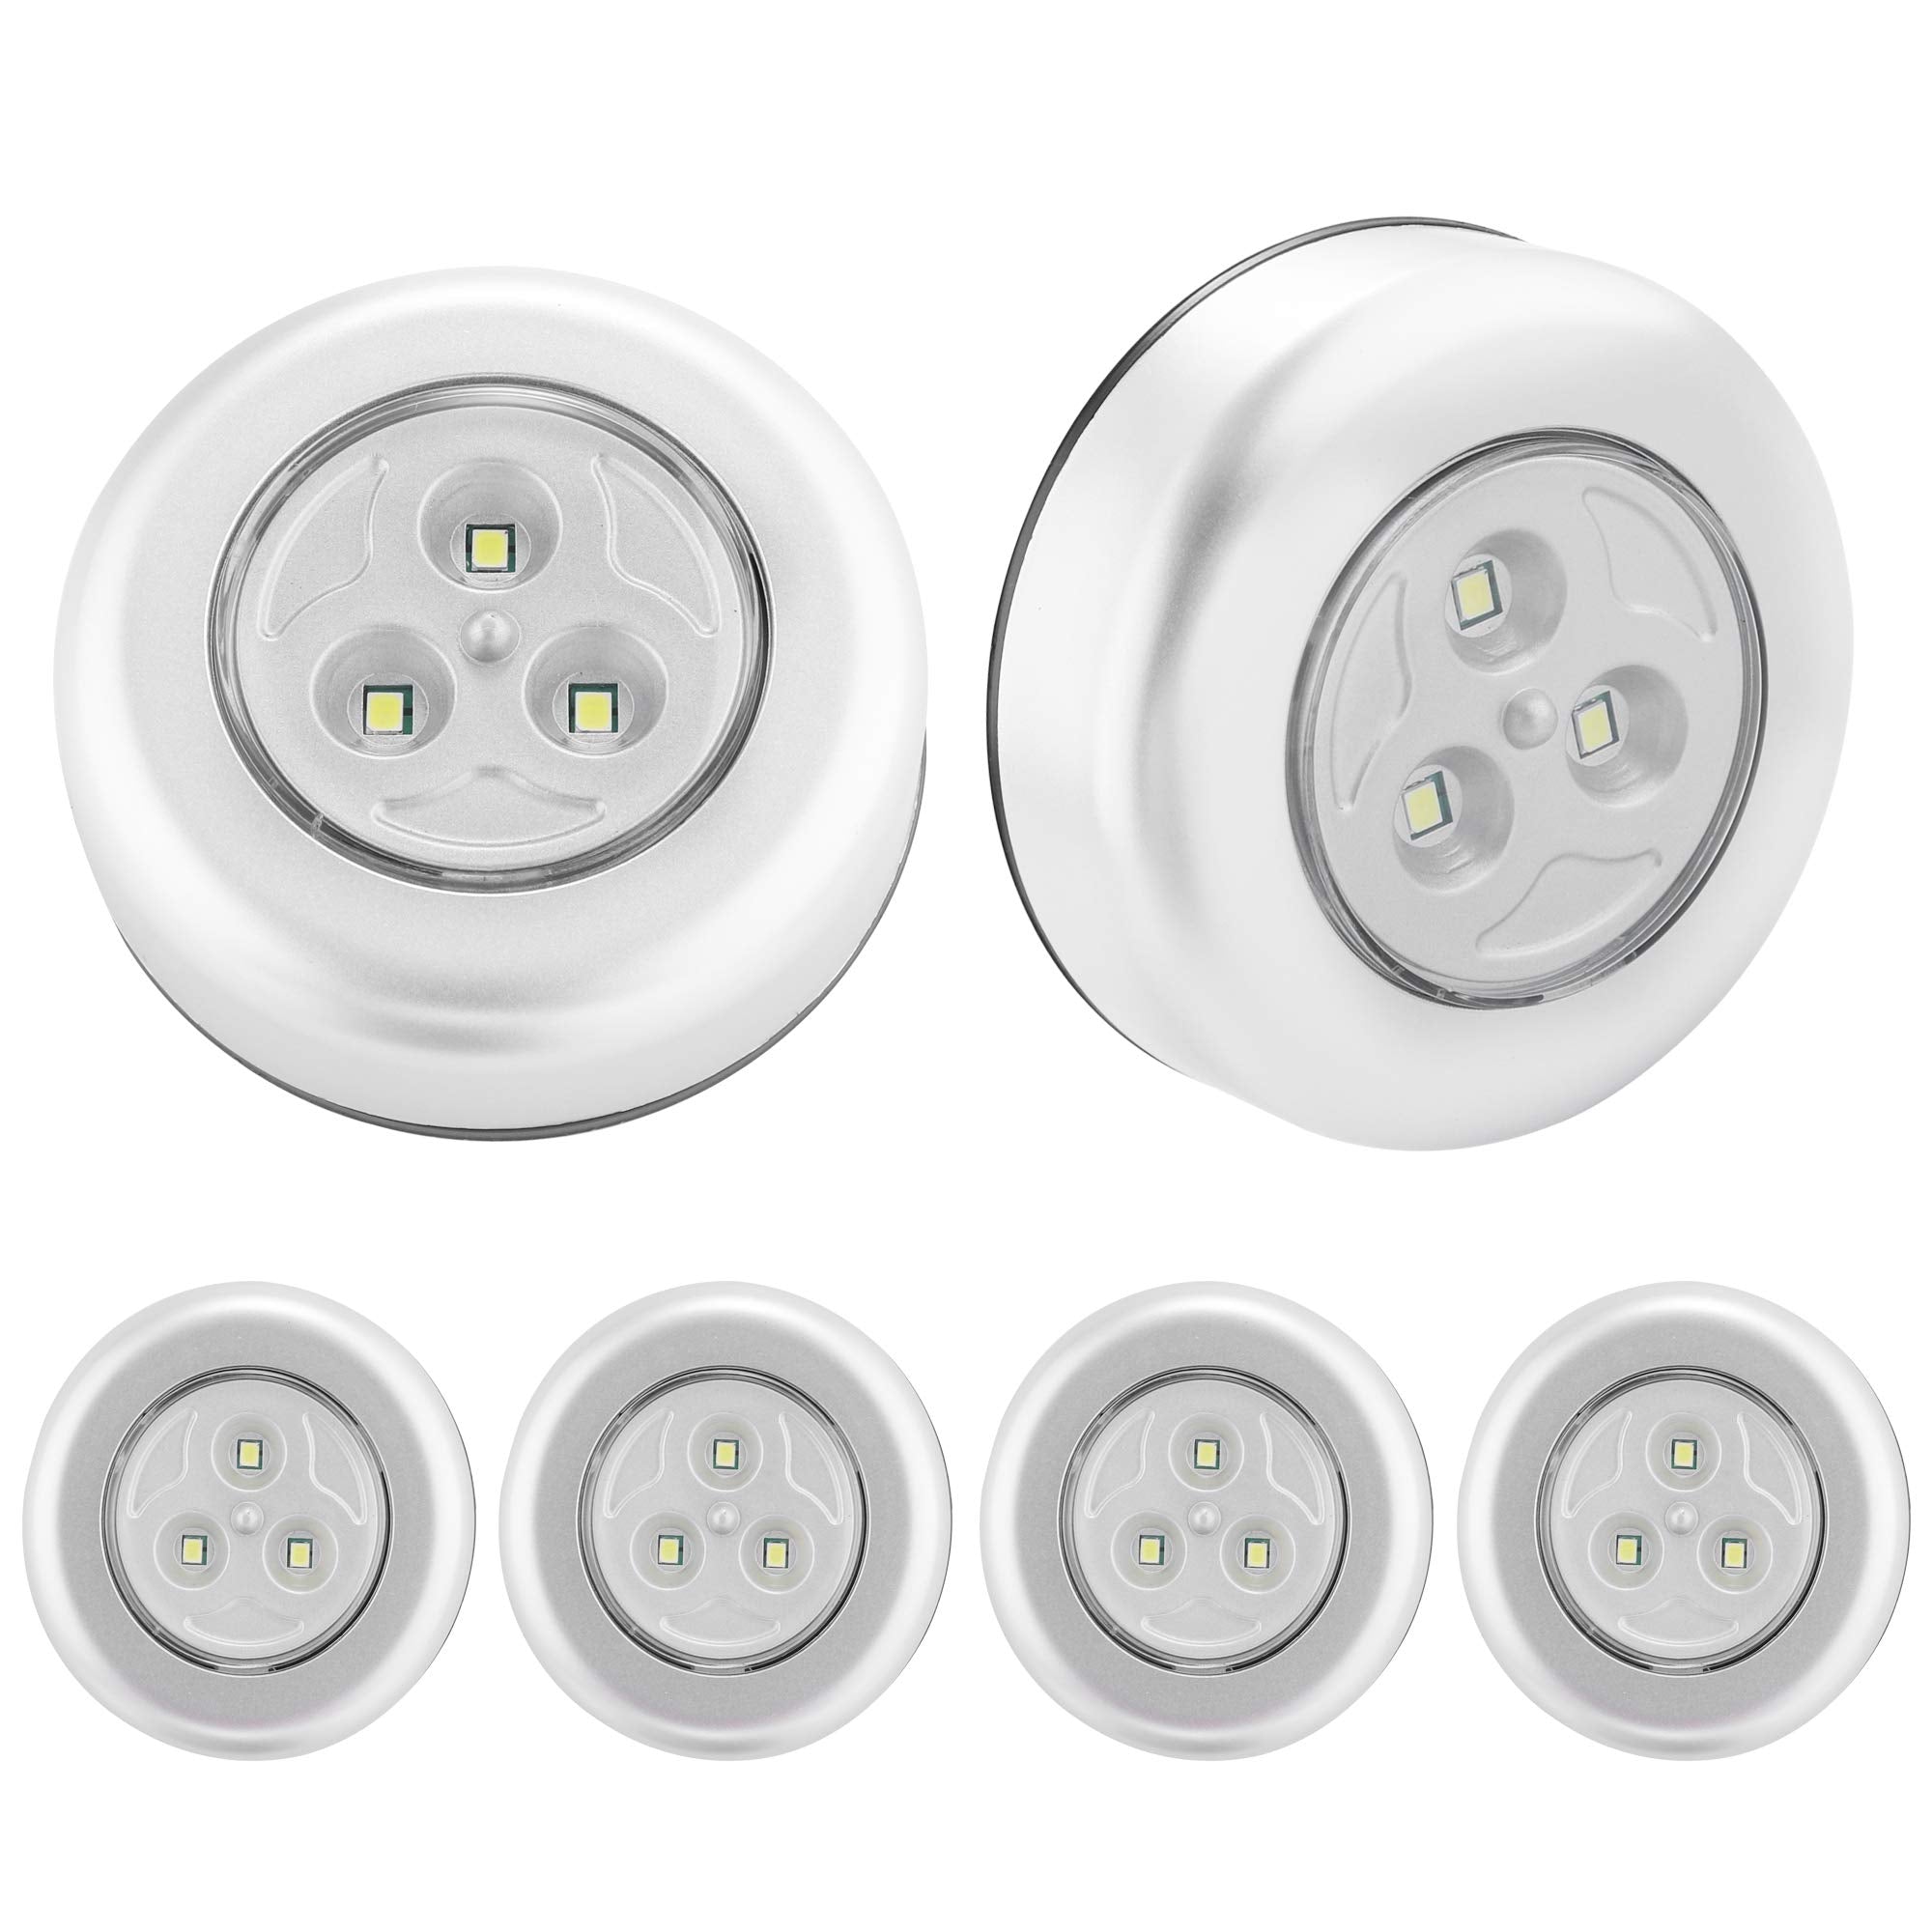 SOAIY 6 Pack Upgraded Super Bright Battery-Powered Push Light, Strong Stick-On Wireless Touch Light, Battery-Operated Touch Night Lamp for Closet, Counter, Attic, Car, Shed, Storage Room and More